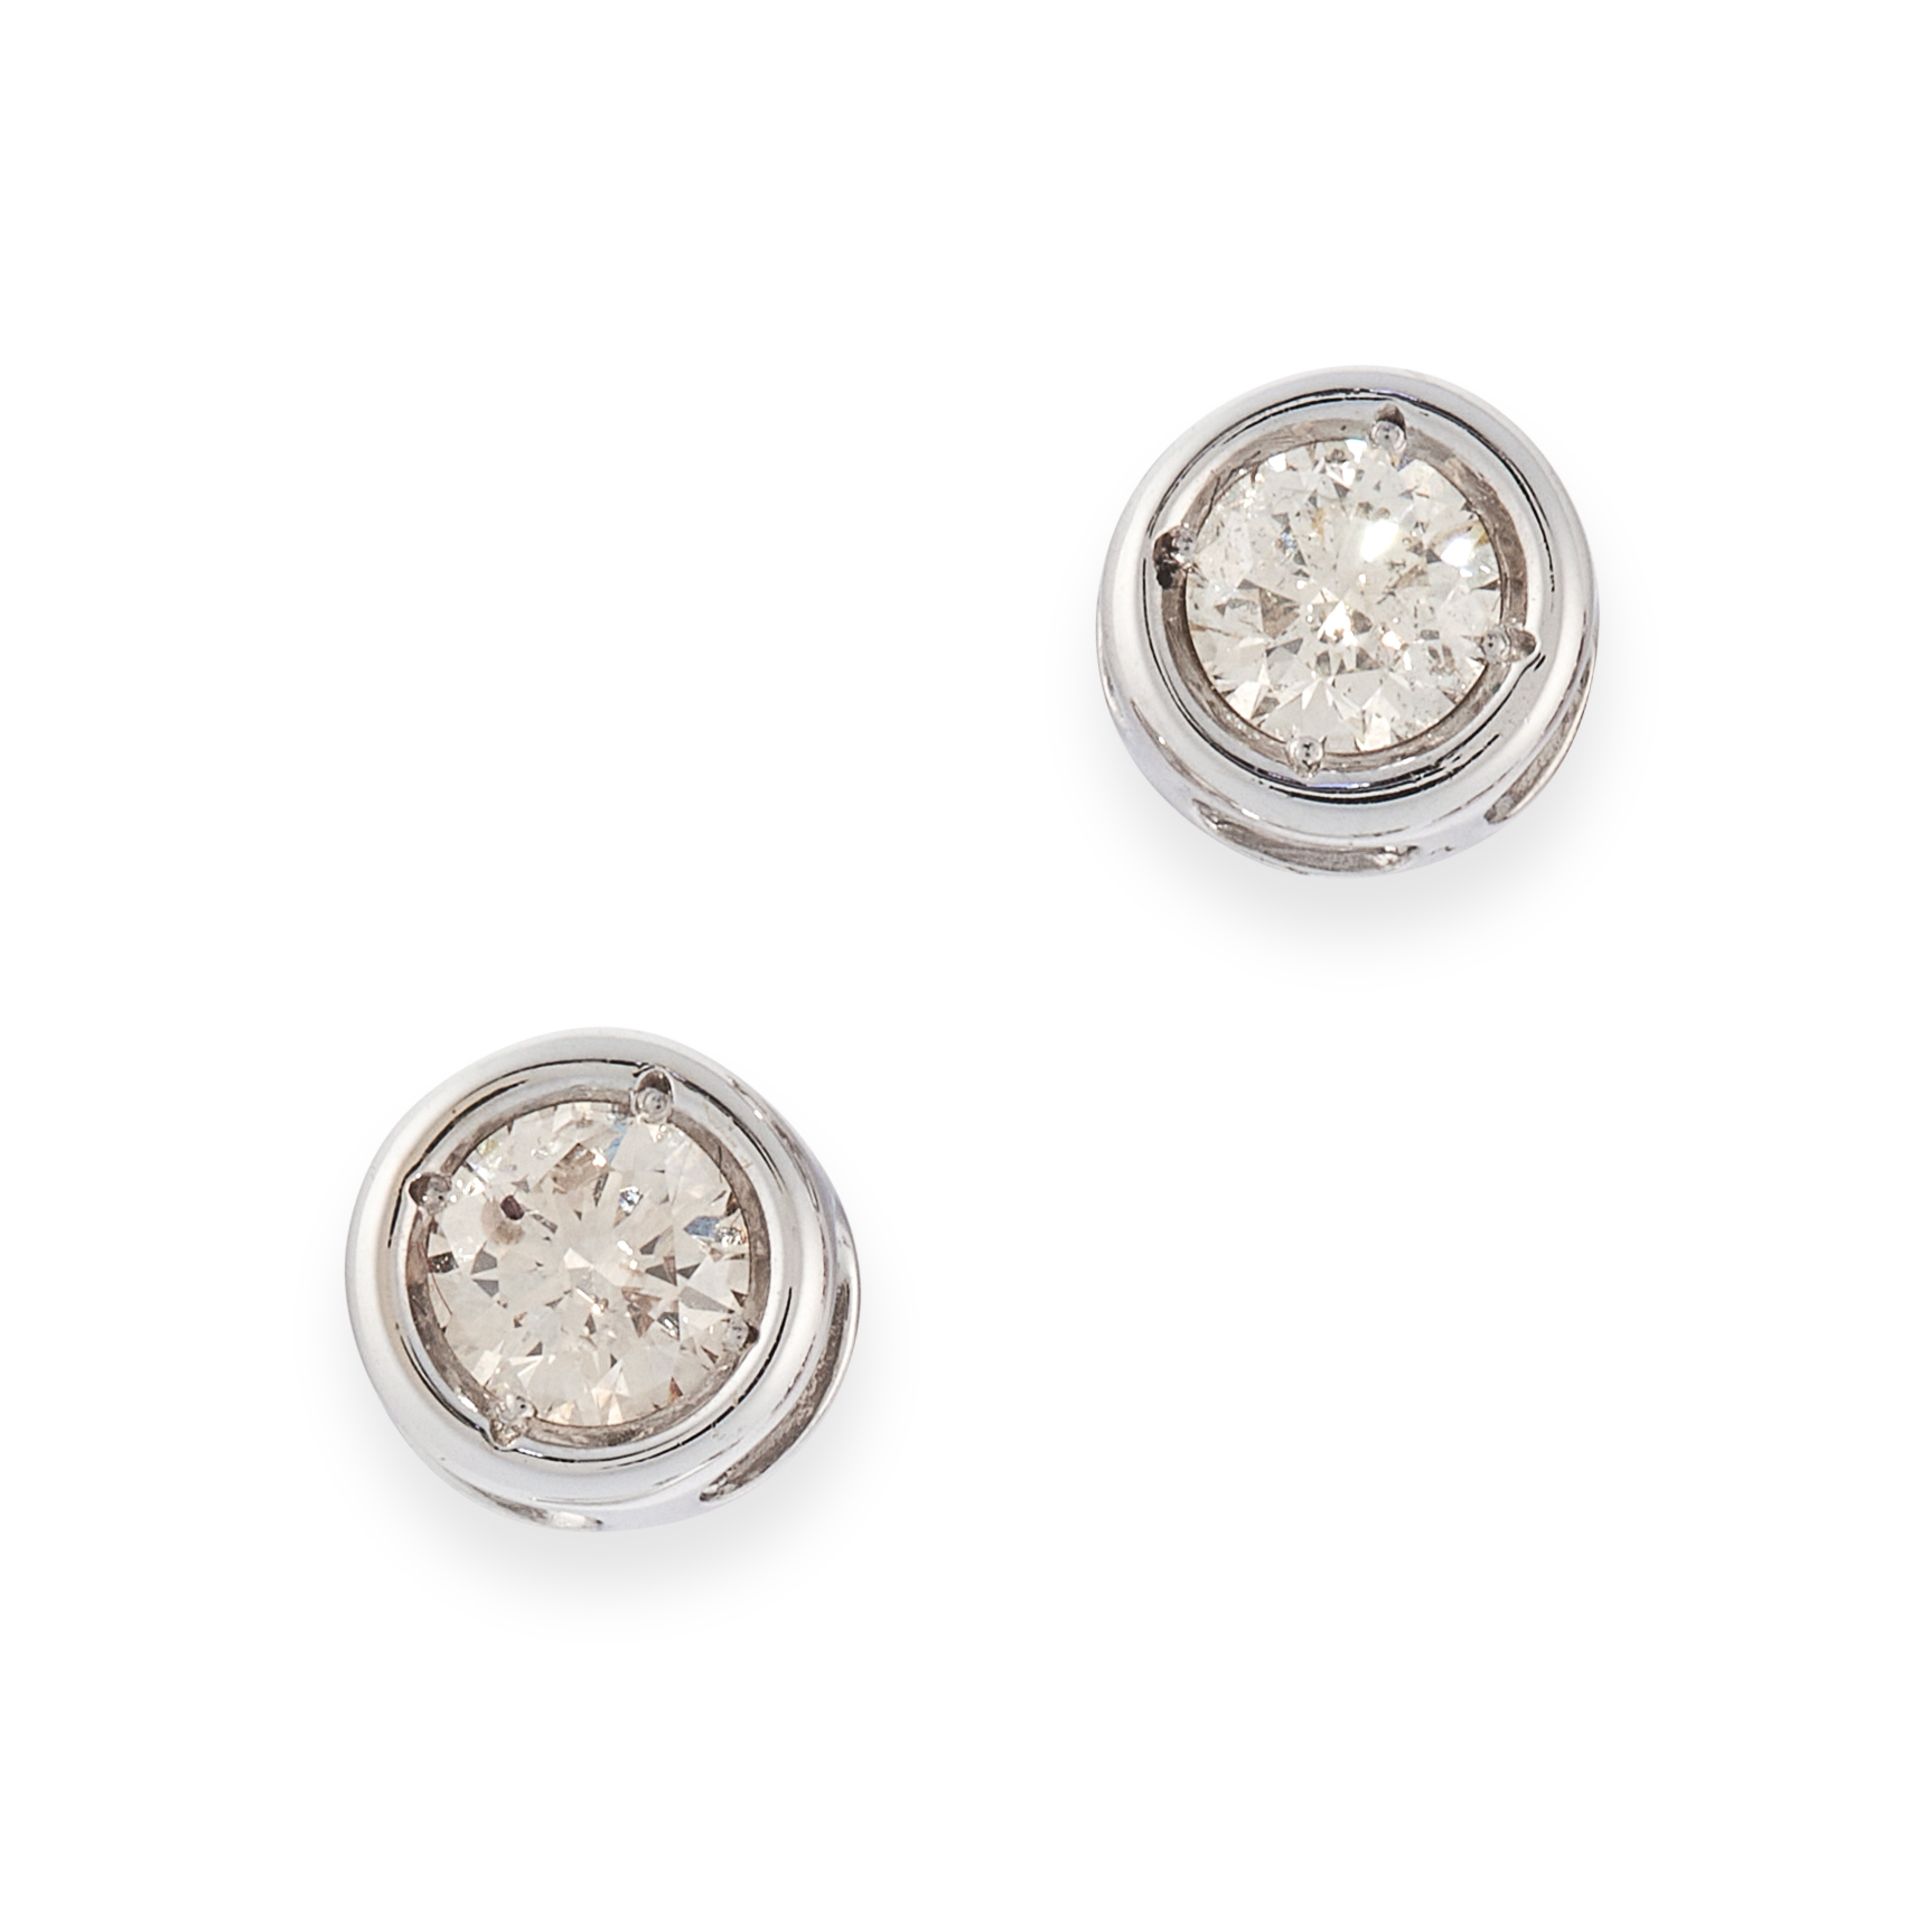 A PAIR OF DIAMOND STUD EARRINGS in 18ct white gold, each set with a round cut diamond, stamped